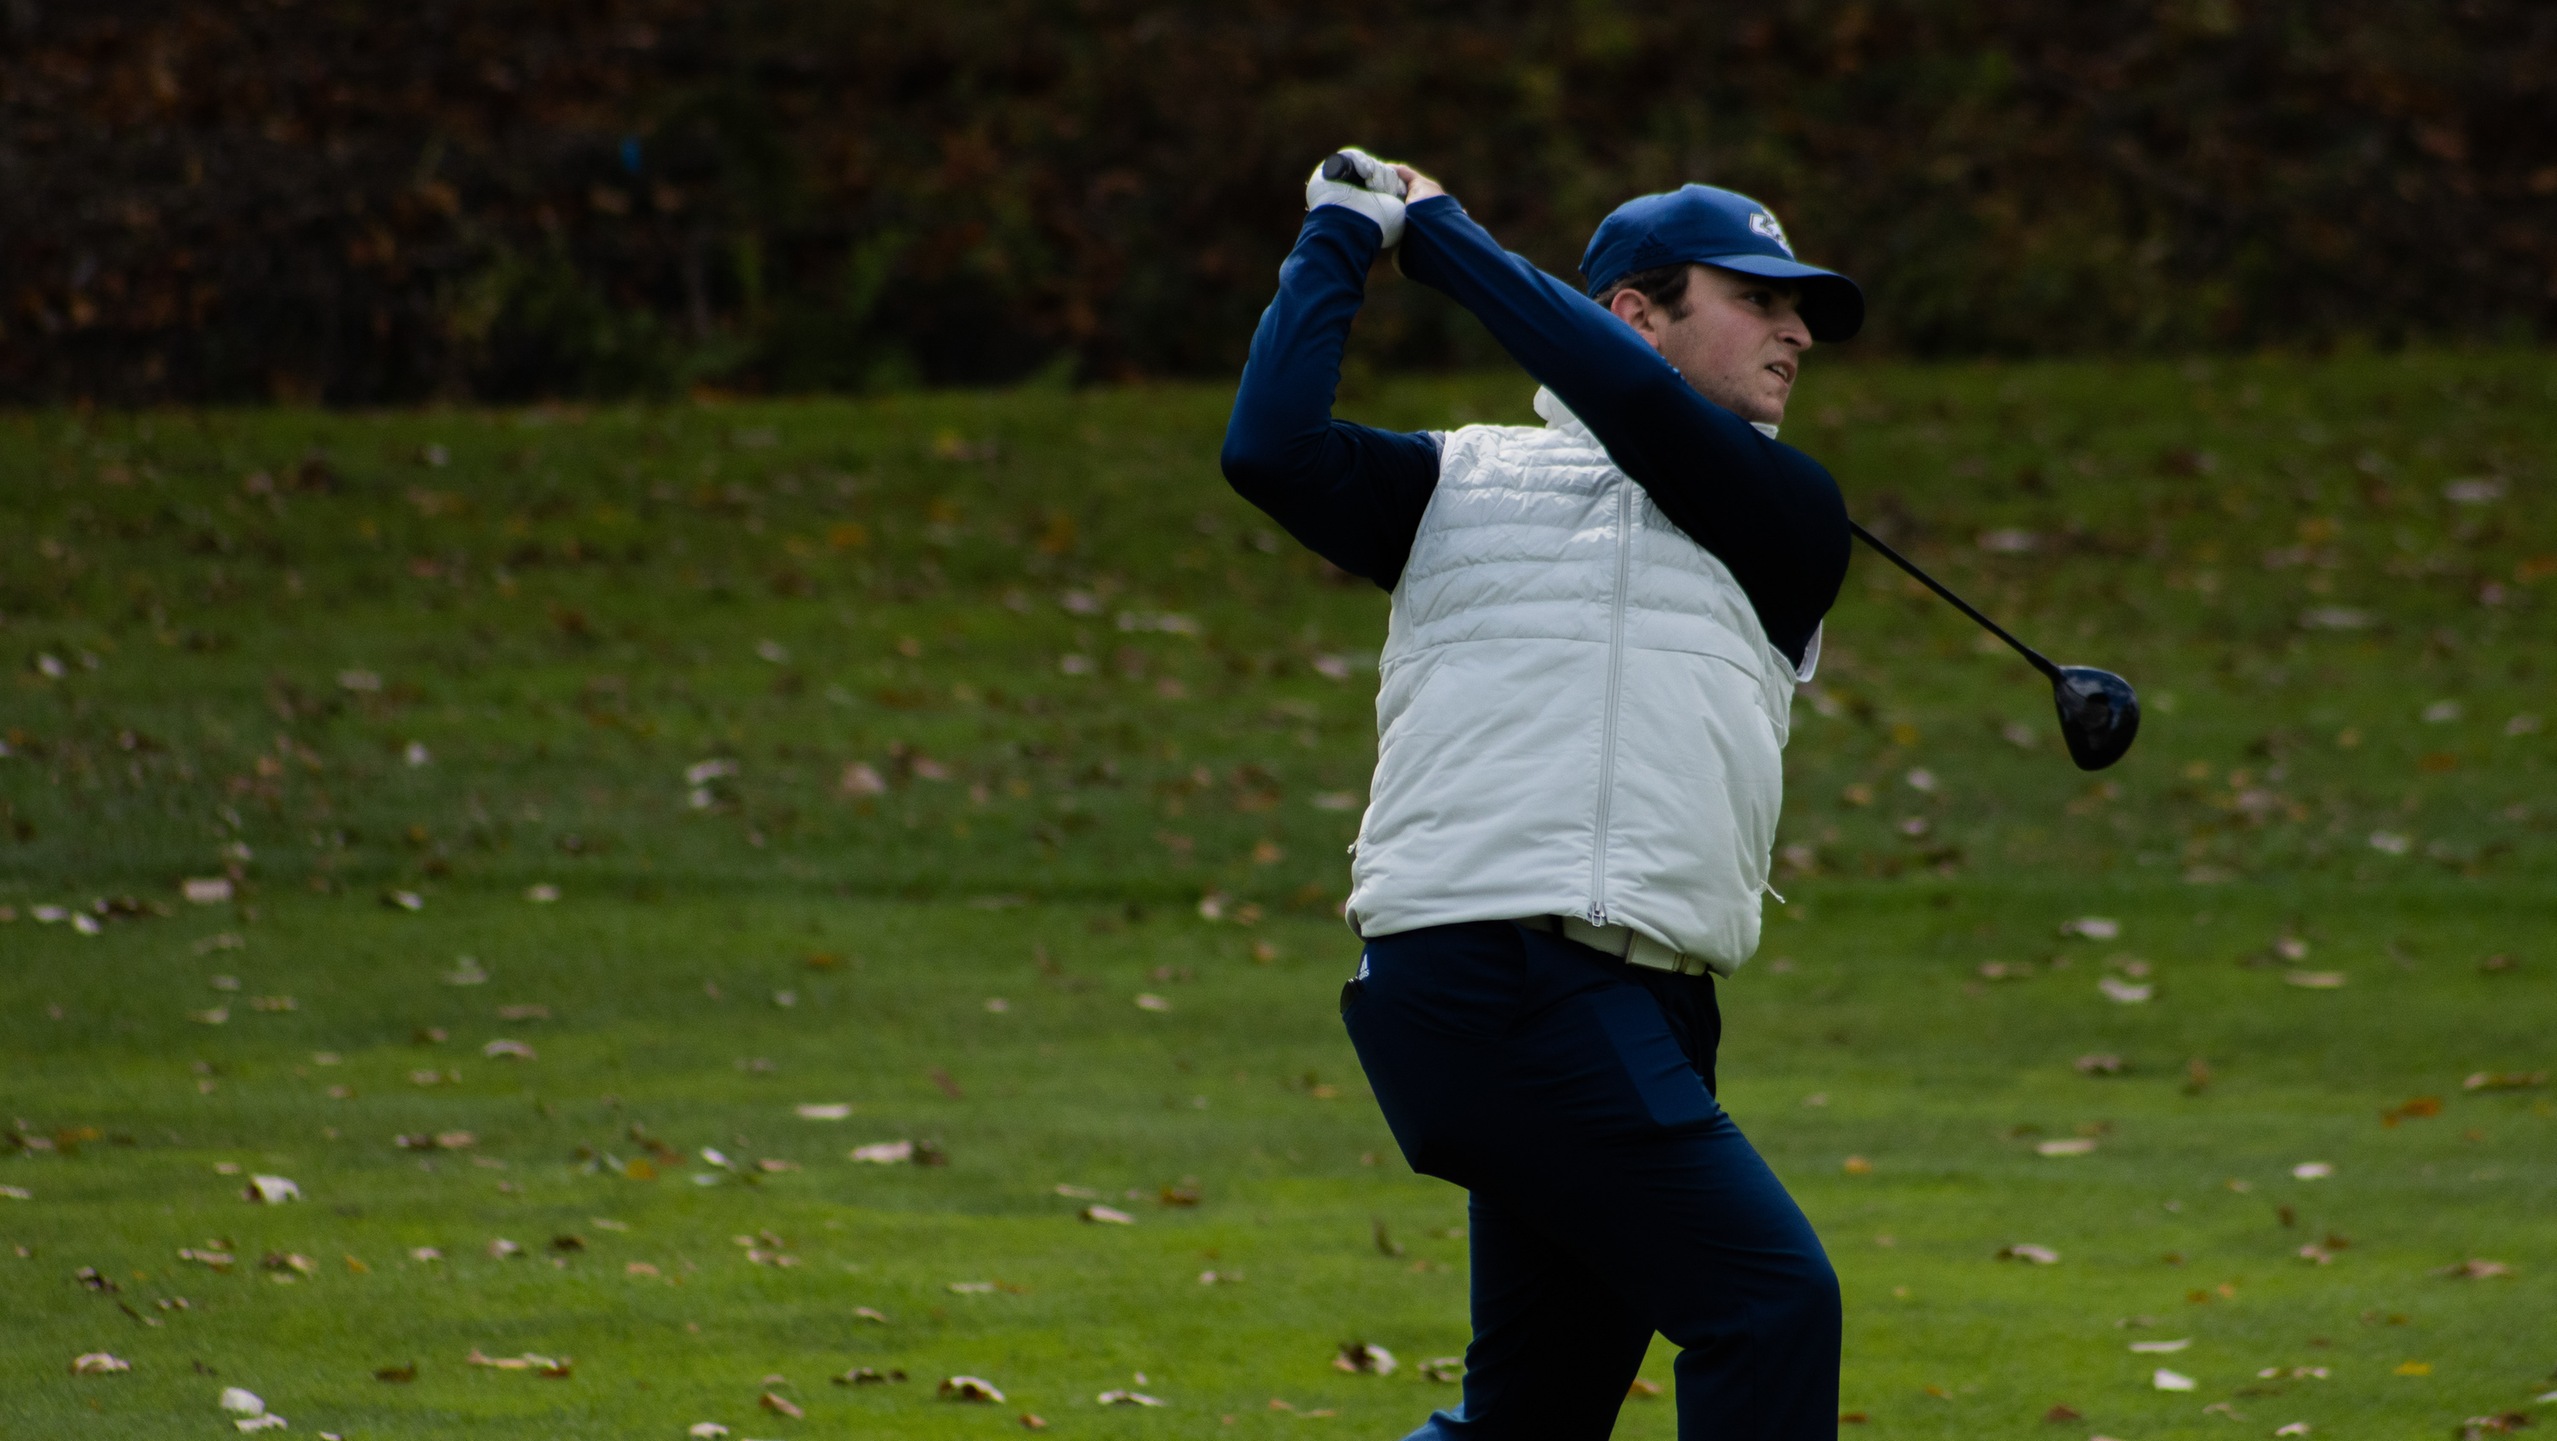 Men's Golf Hold Tenth at Day One of Pennsylvania Classic